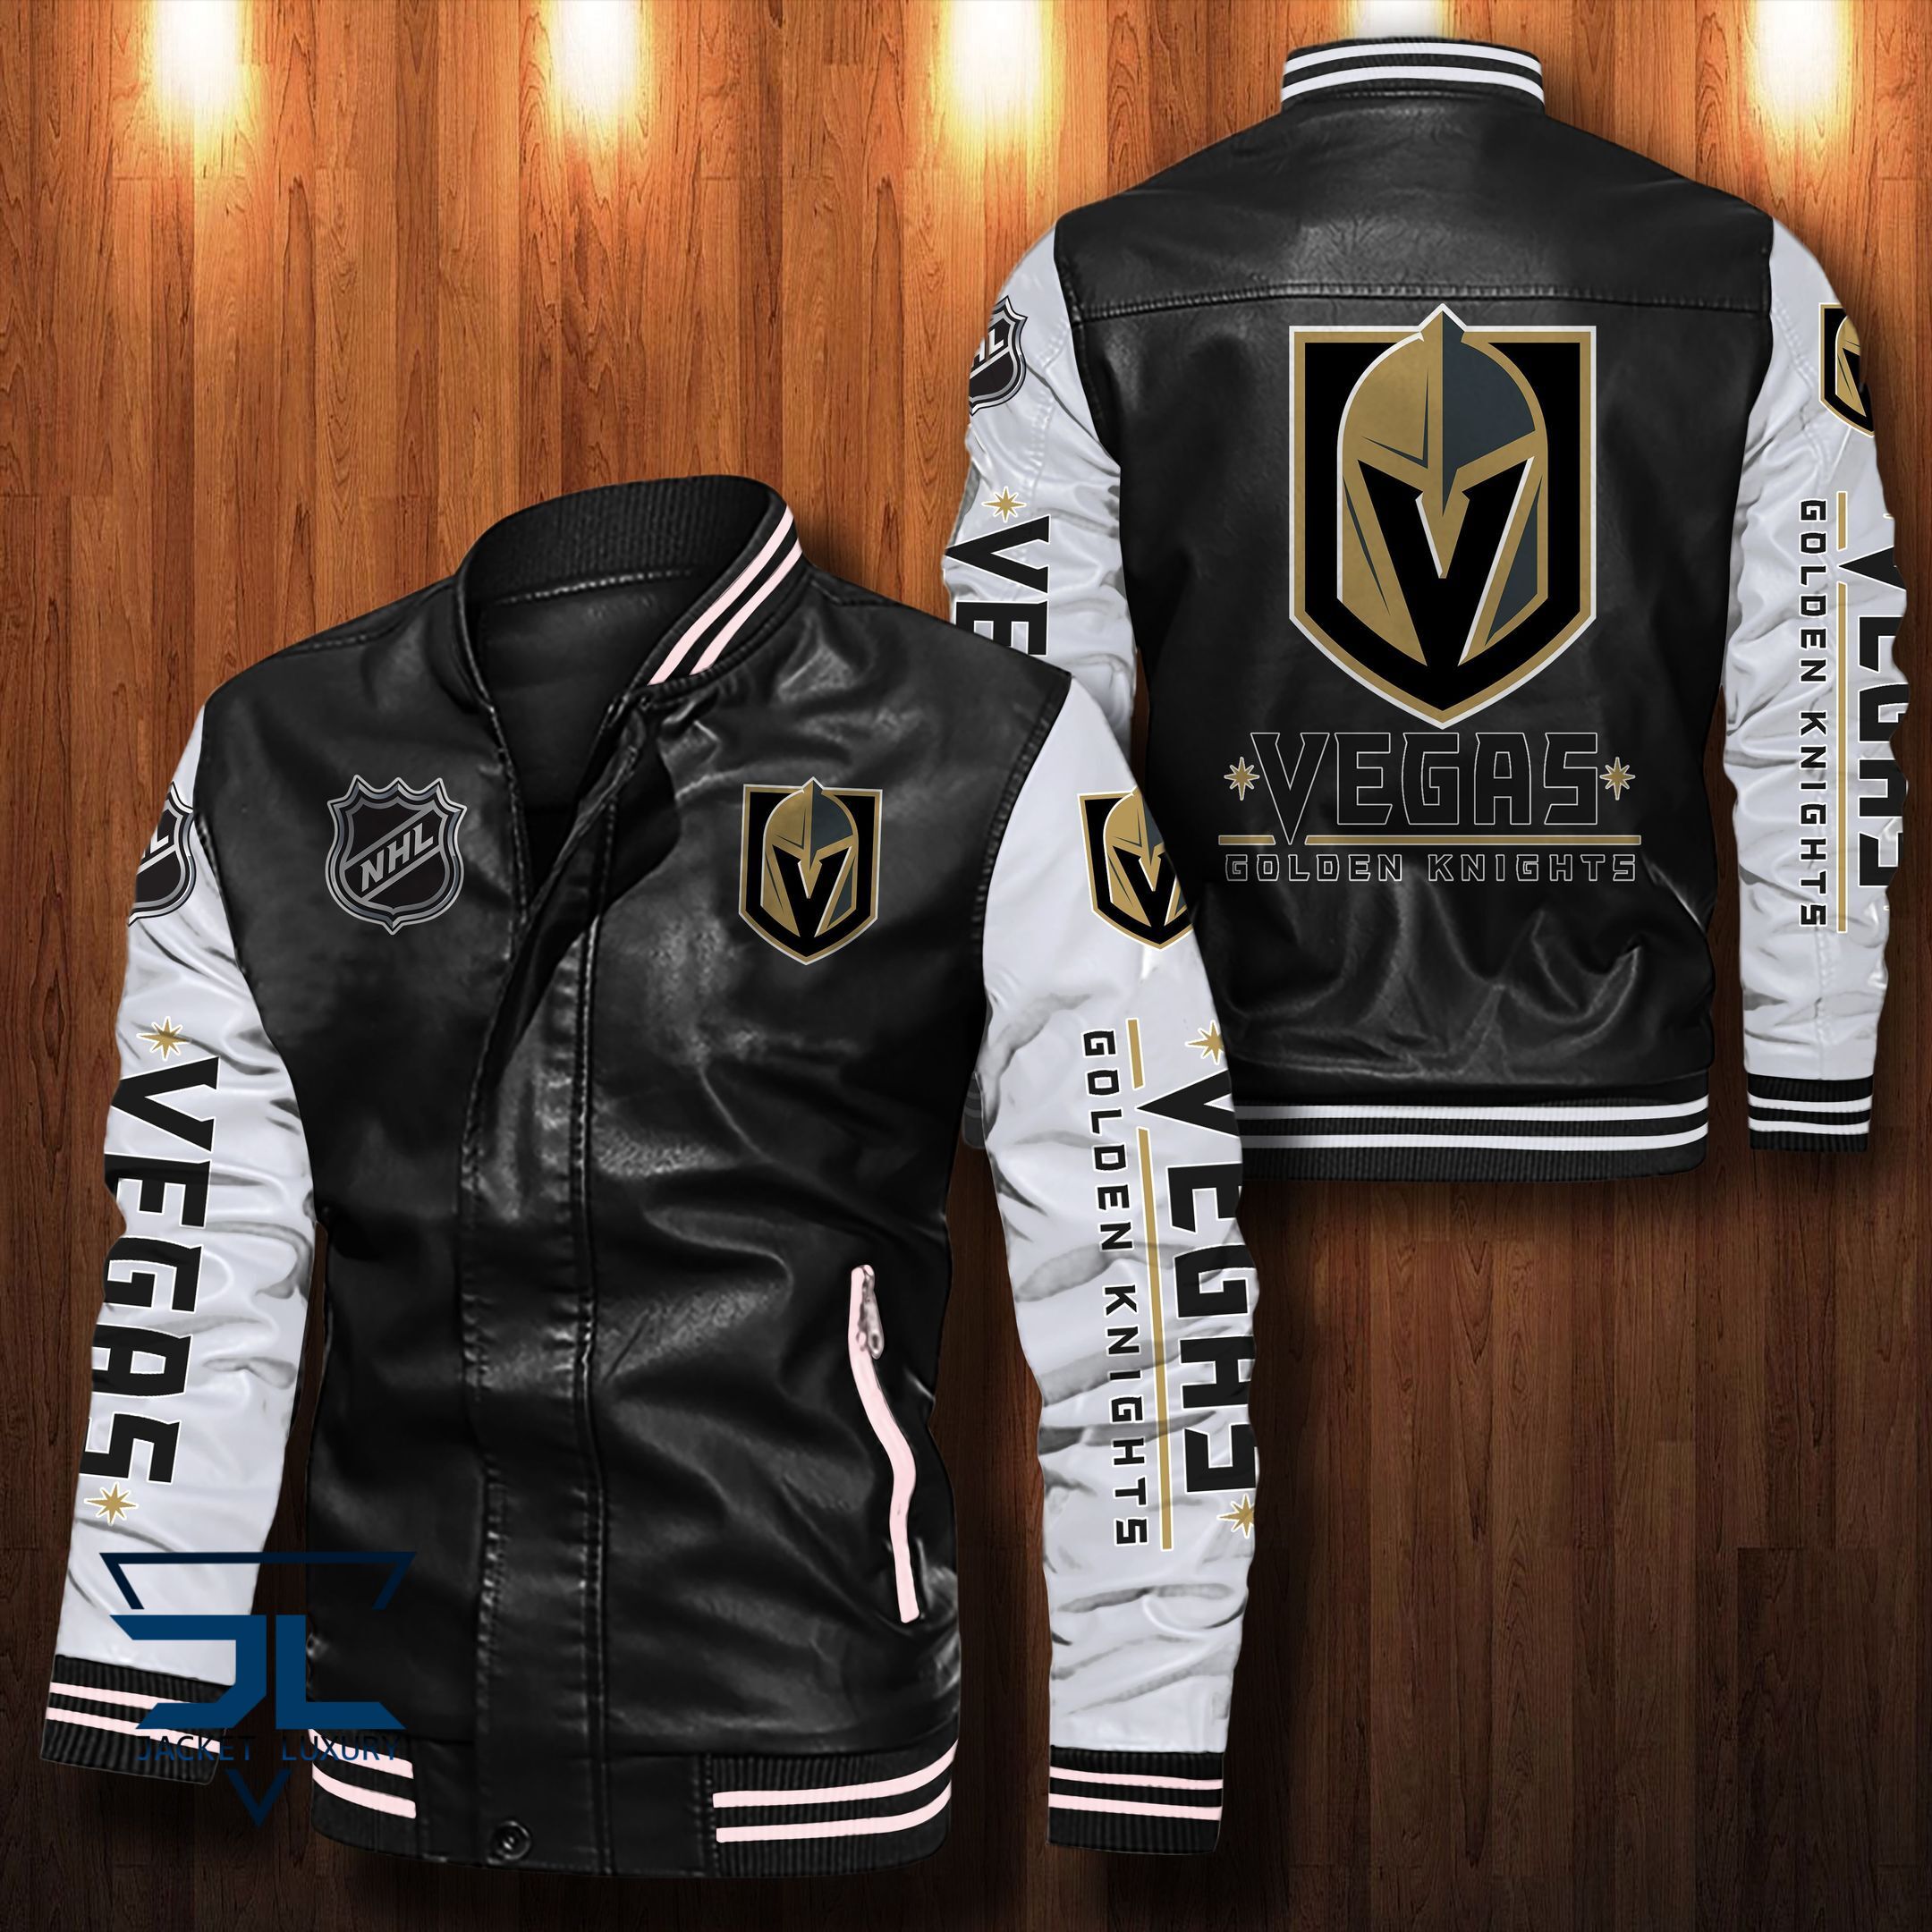 HOT Jacket only $69,99 so don't miss out - Be sure to pick up yours today! 181